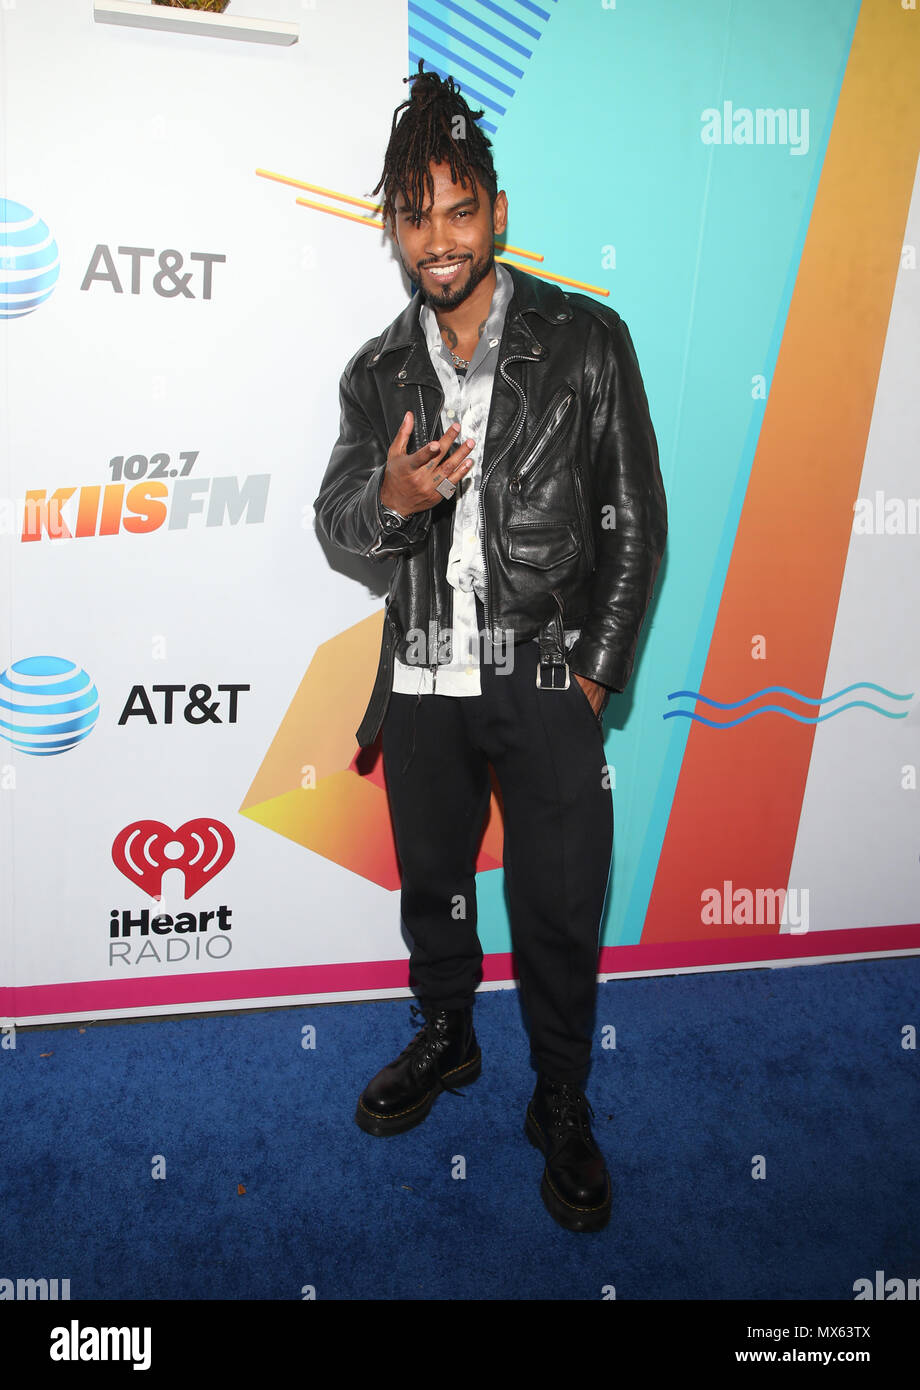 Los Angeles, Ca, USA. 2nd June, 2018. Miguel at iHeartRadio Wango Tango by AT&T at Banc of California Stadium in Los Angeles, California on June 2, 2018. Credit: MediaPunch Inc/Alamy Live News Stock Photo